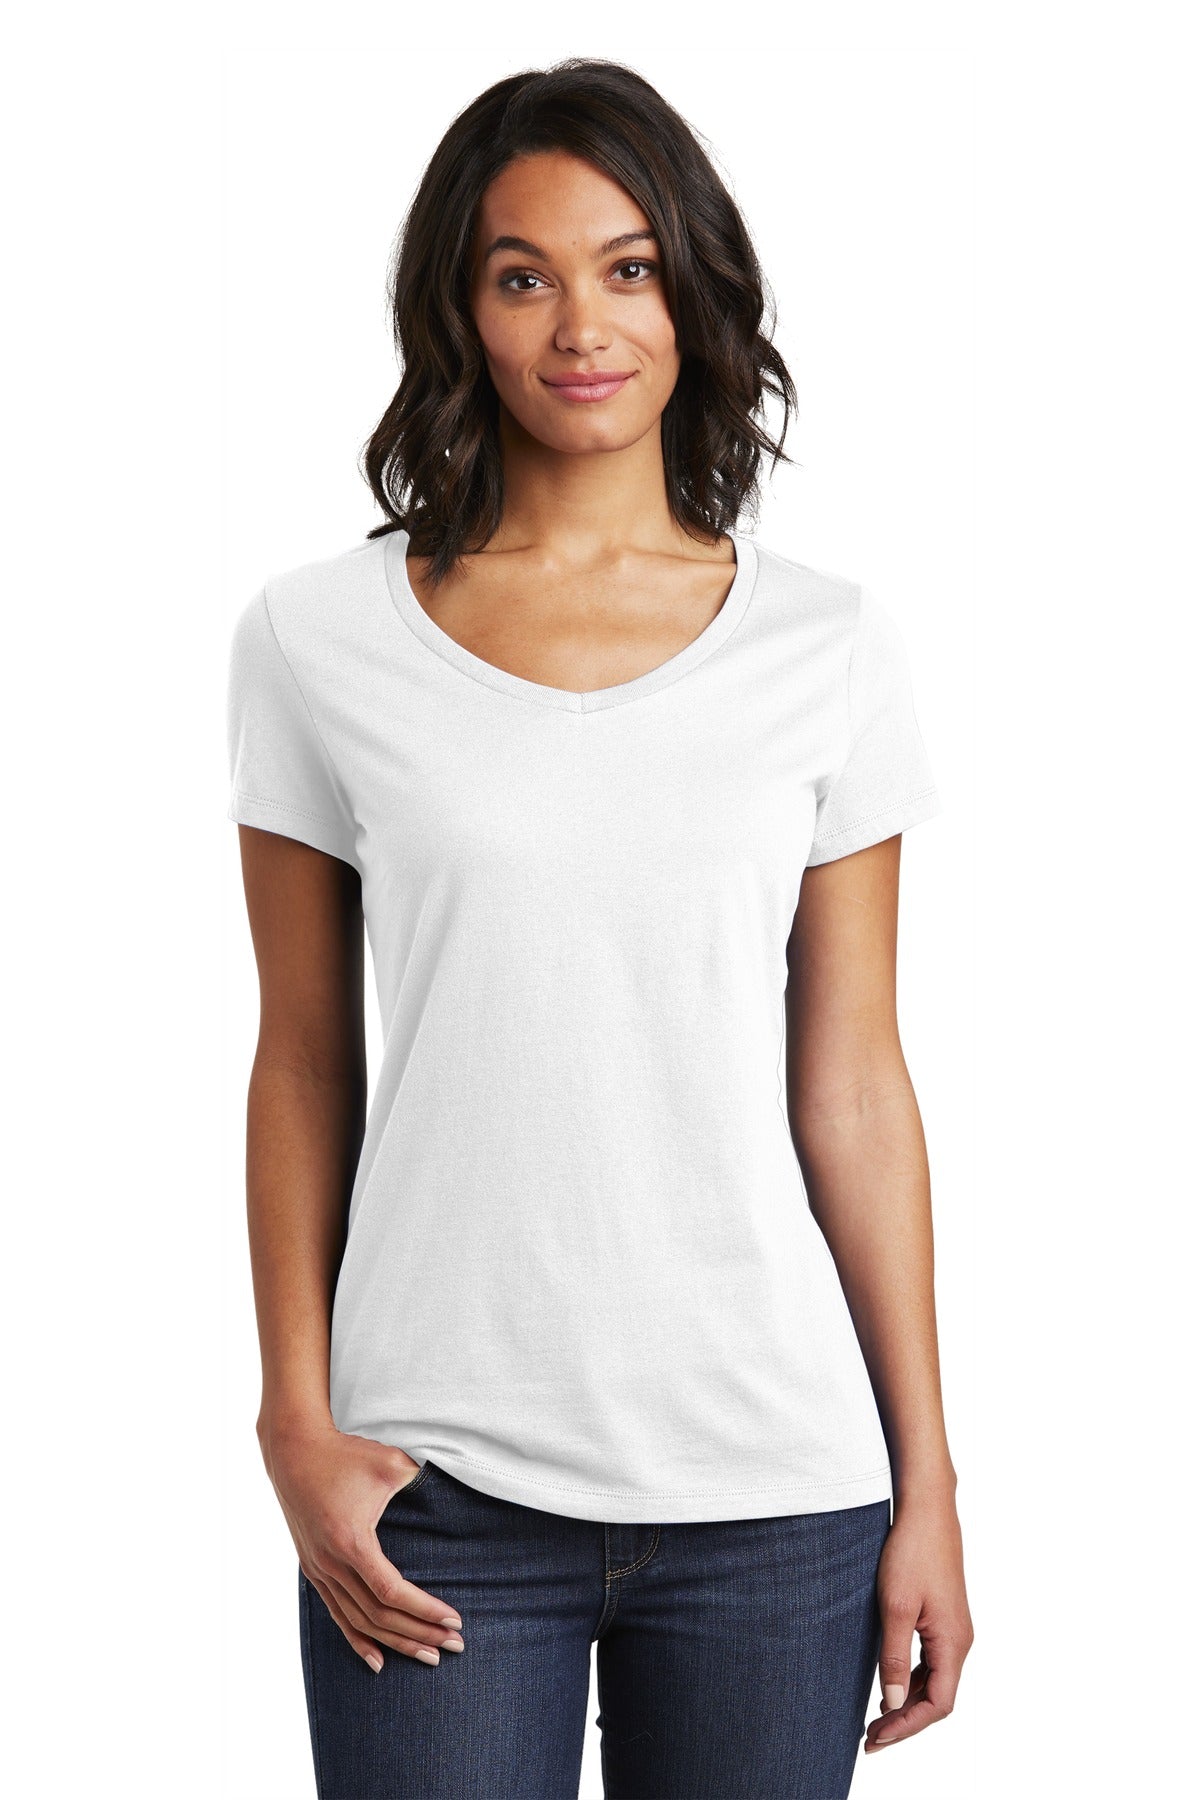 District Women's Very Important Tee V-Neck. DT6503